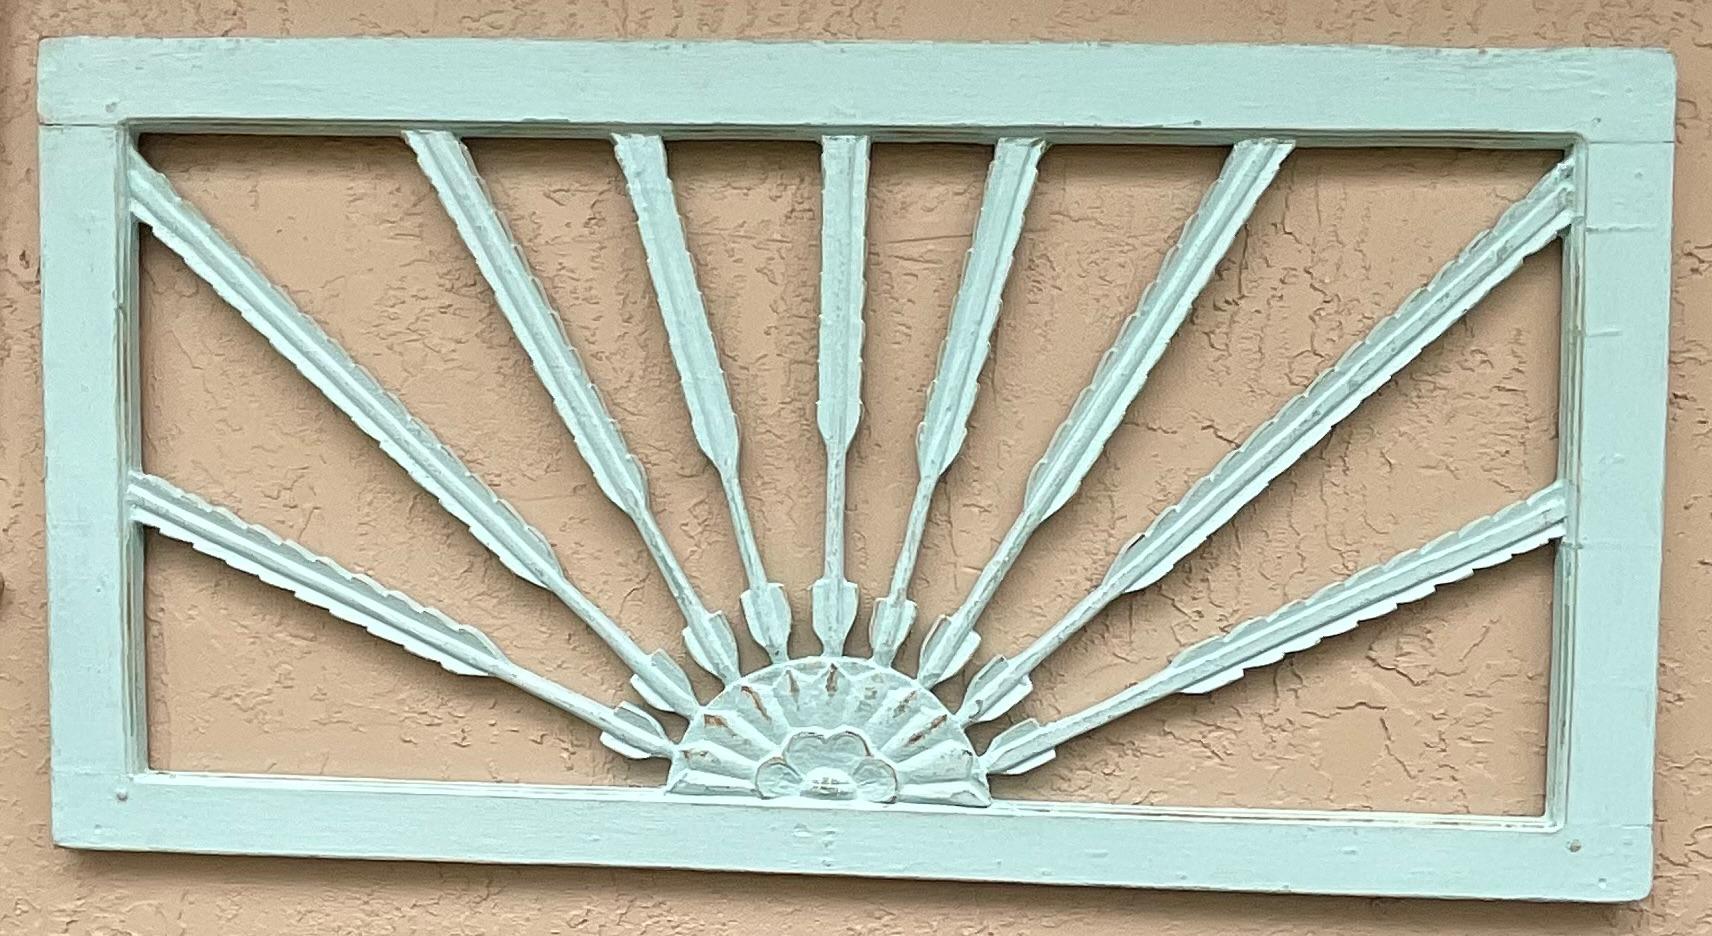 Beautiful architectural wall hanging, hand-carved of arrows motif ,and hand painted with light green Color.
Great object of art for wall display.